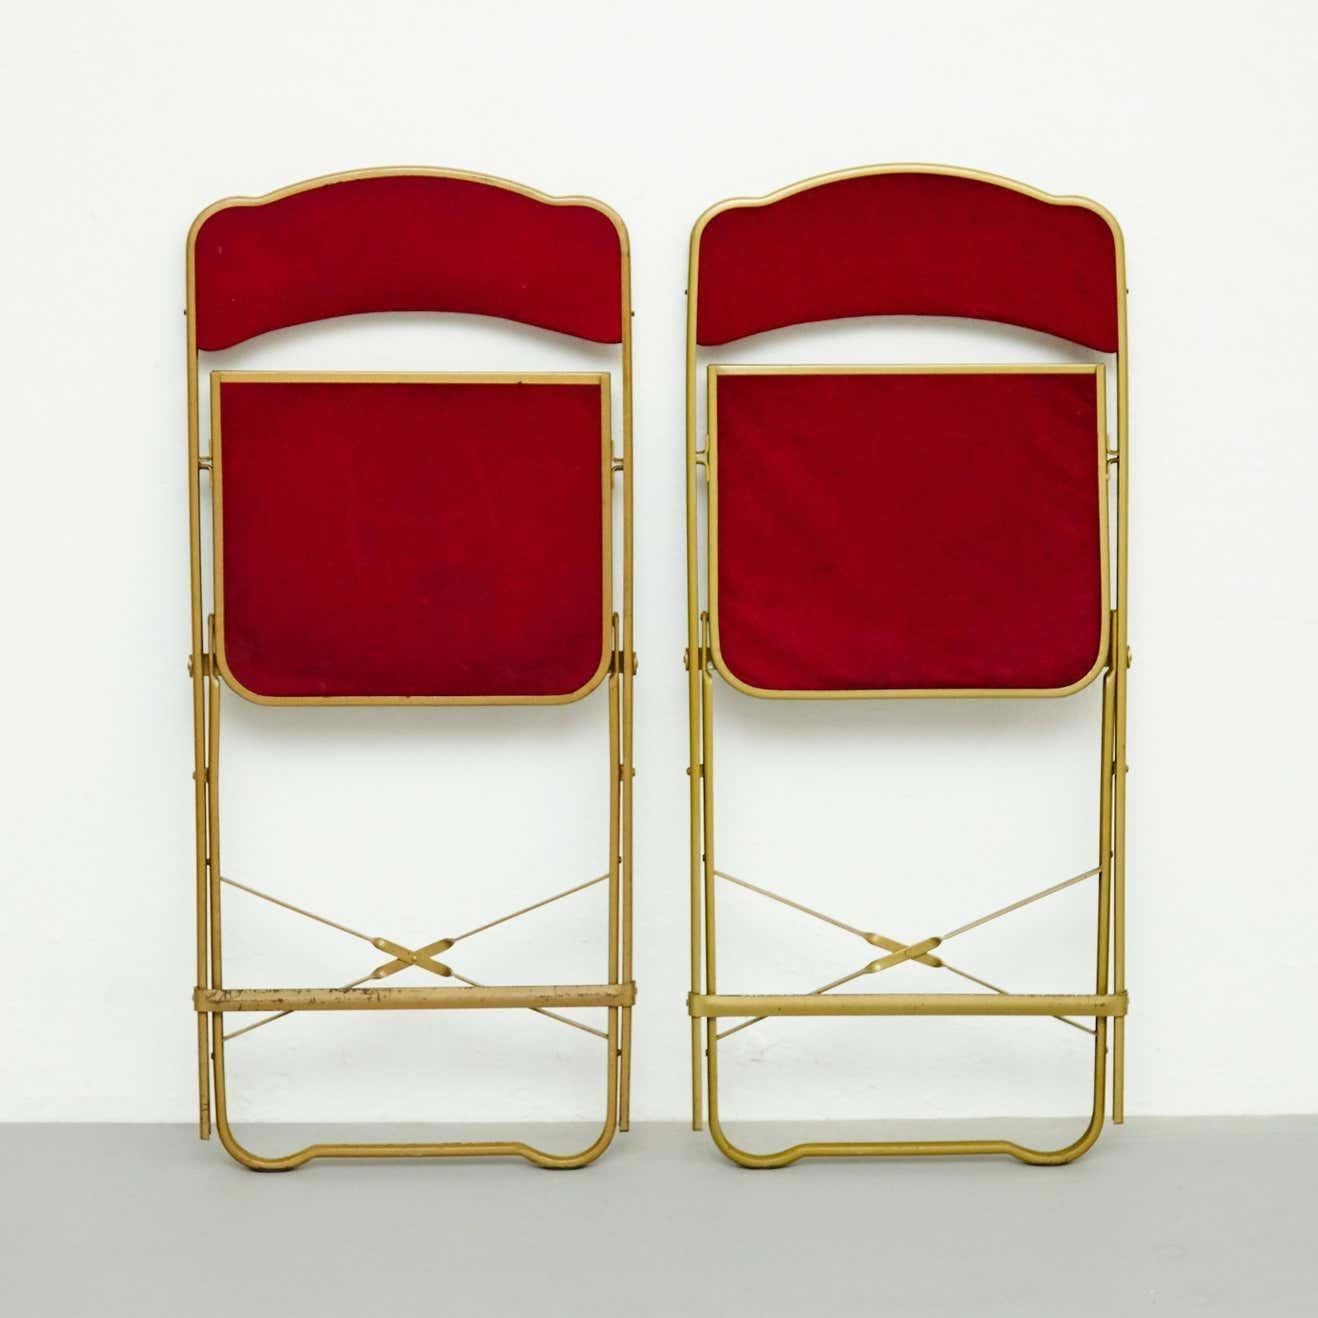 Pair of antique folding theater chairs.
By unknown manufacturer, France, circa 1960.
In original condition, with minor wear consistent with age and use, preserving a beautiful patina.

Material:
Metal

Dimensions:
D 44.5 cm x W 43 cm x H